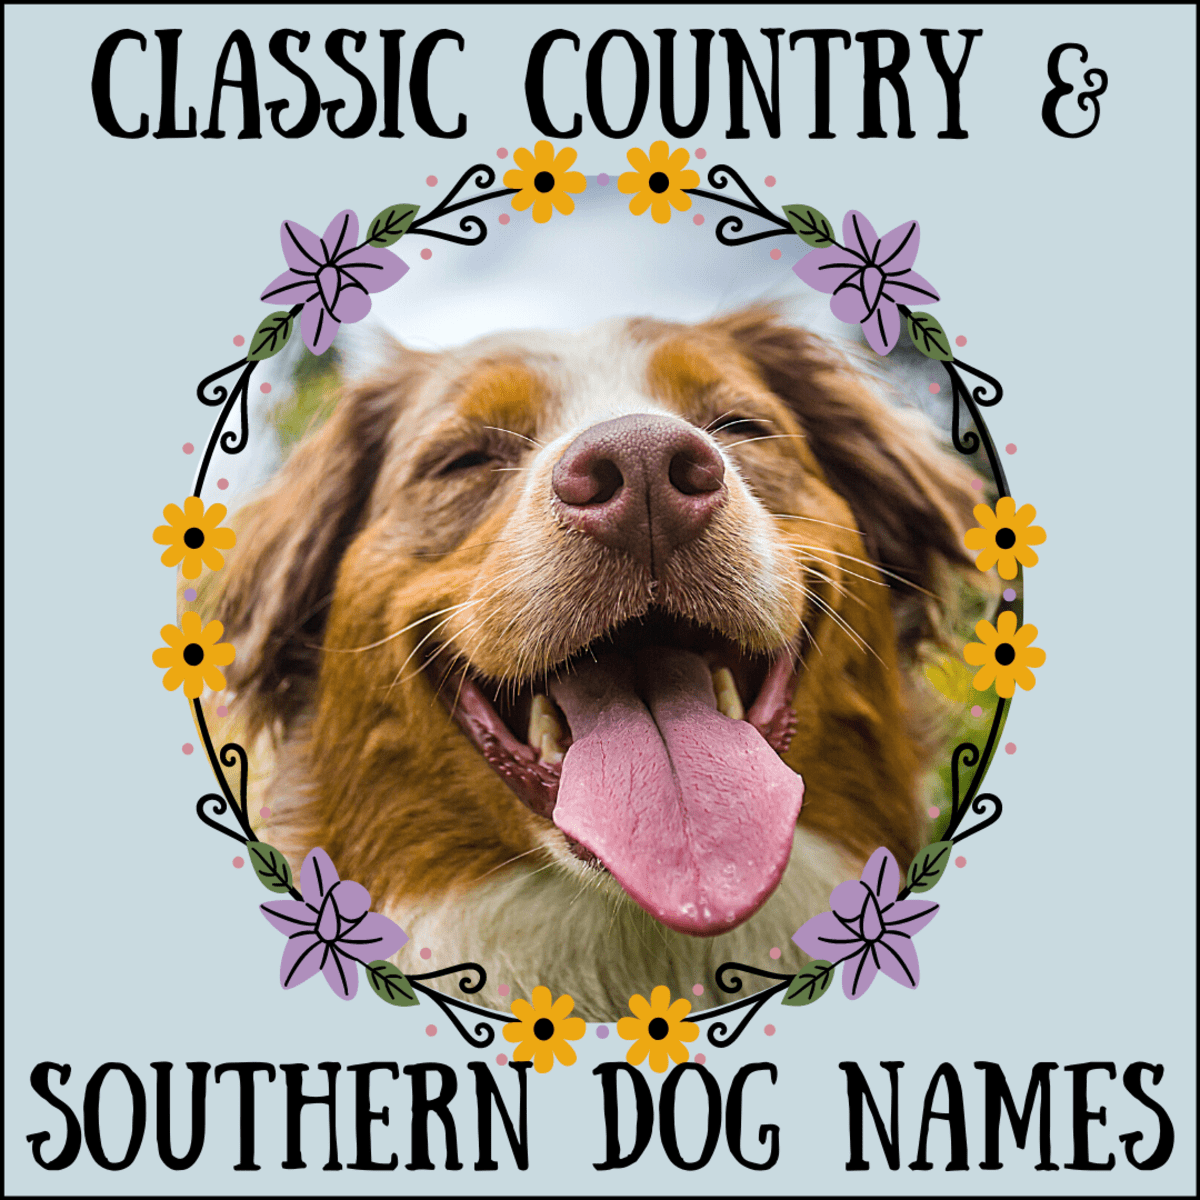 0 Traditional Country Western And Southern Dog Names Pethelpful